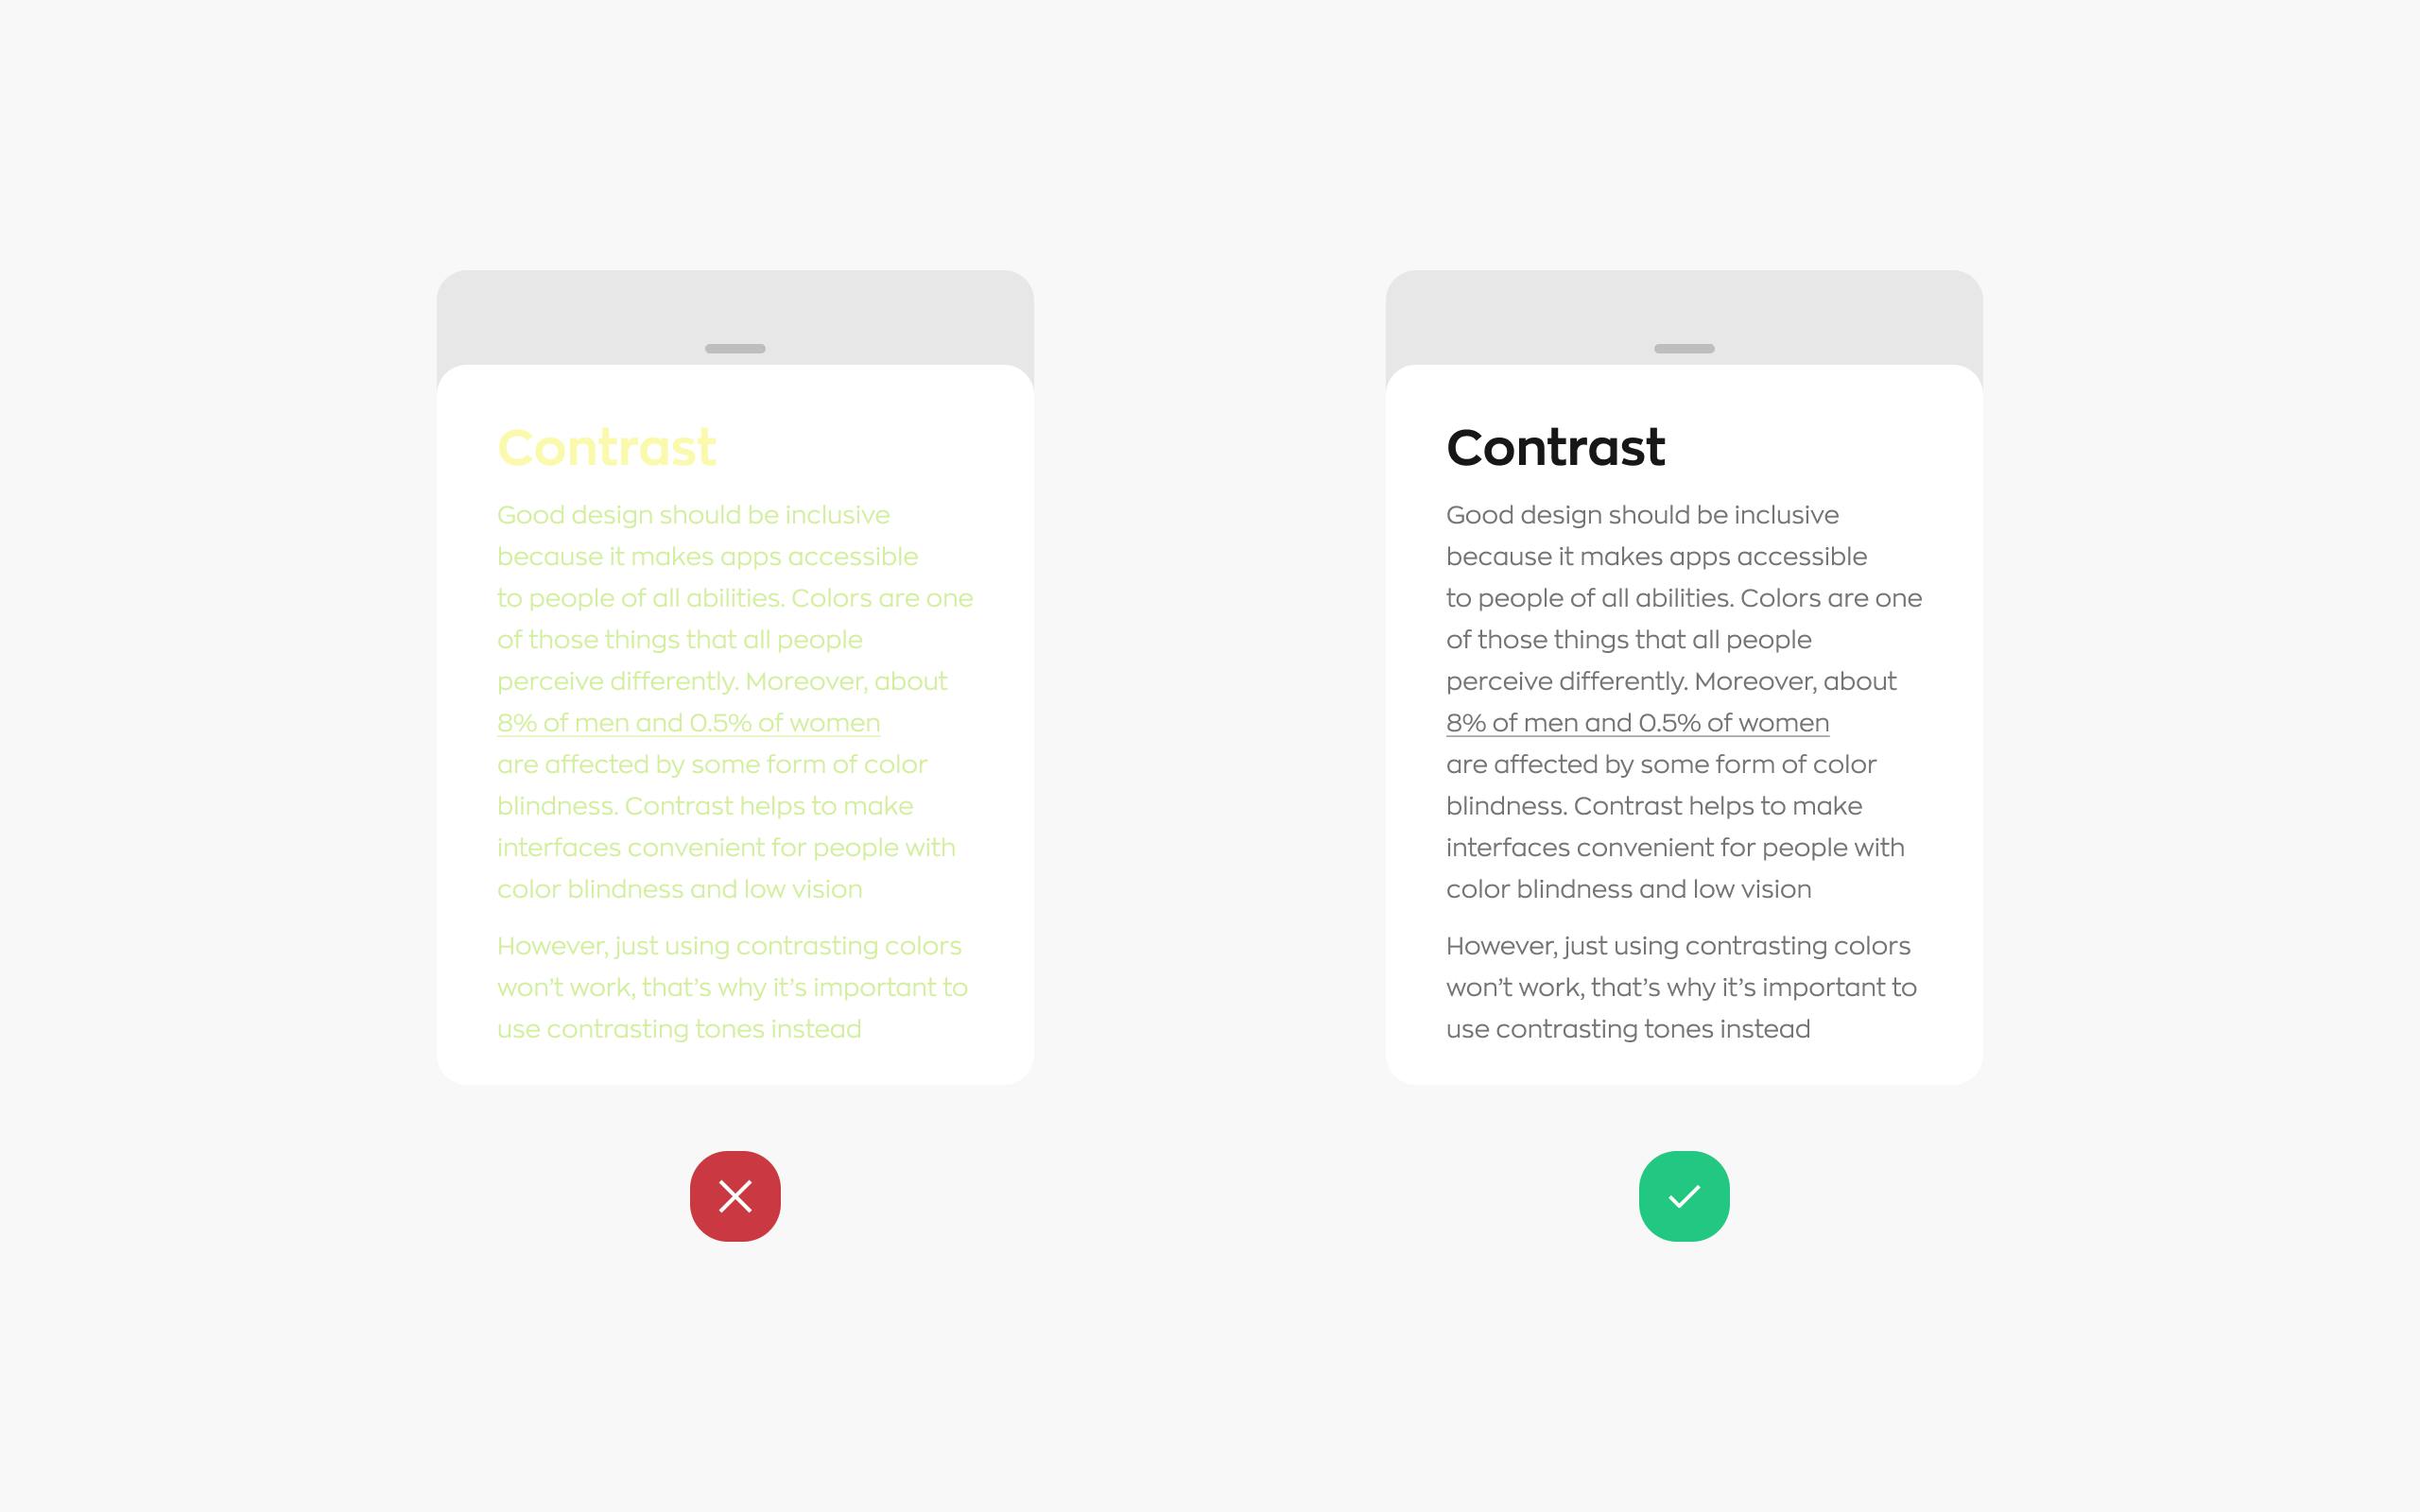 UI design tips on making interfaces more inclusive